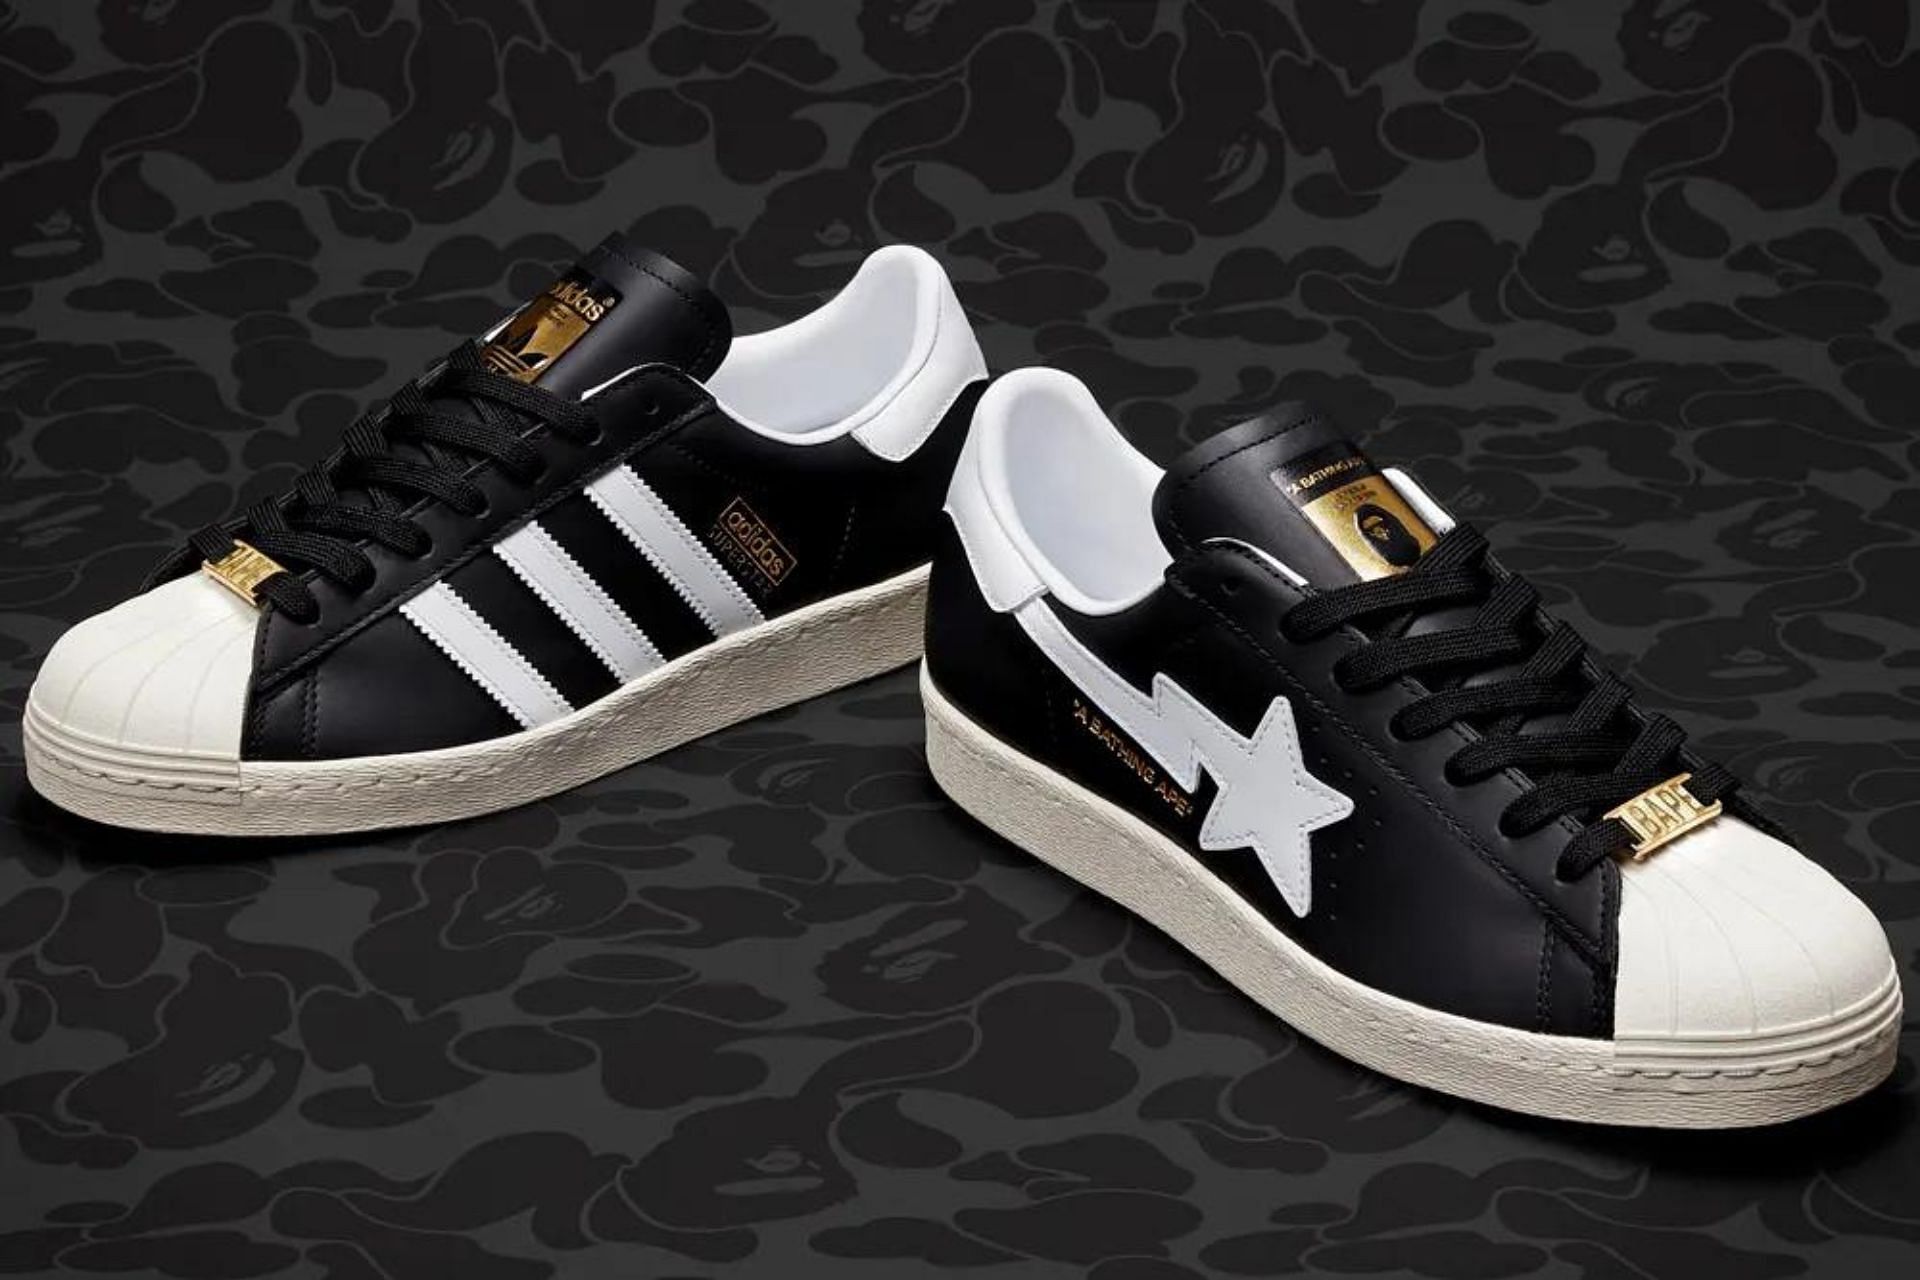 Where to buy A Bathing Ape x Adidas Originals sneakers? Price, release date, and more